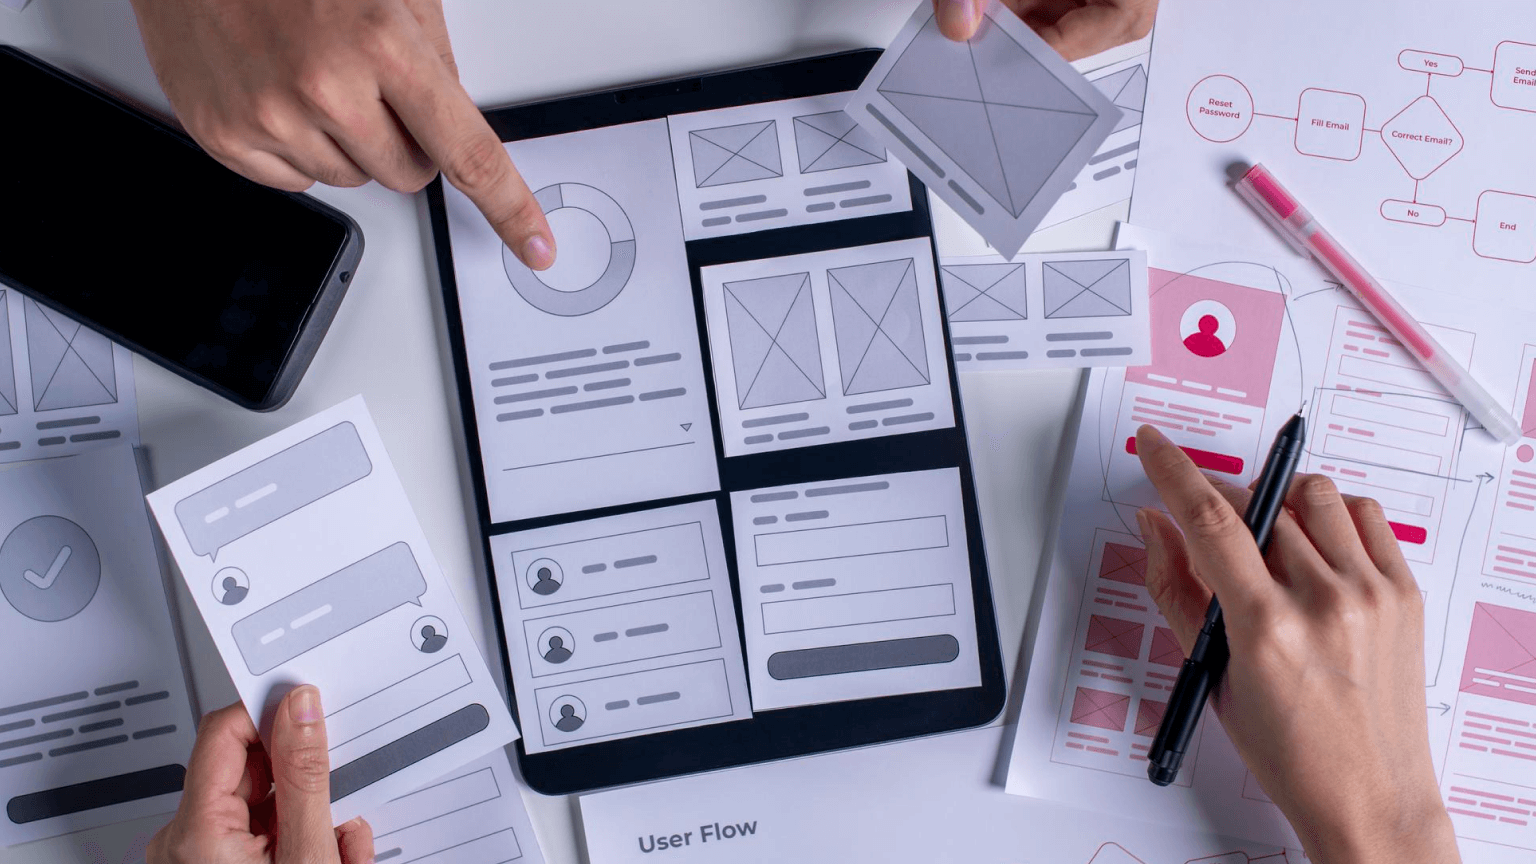 What are the 5 key concepts of user experience design?